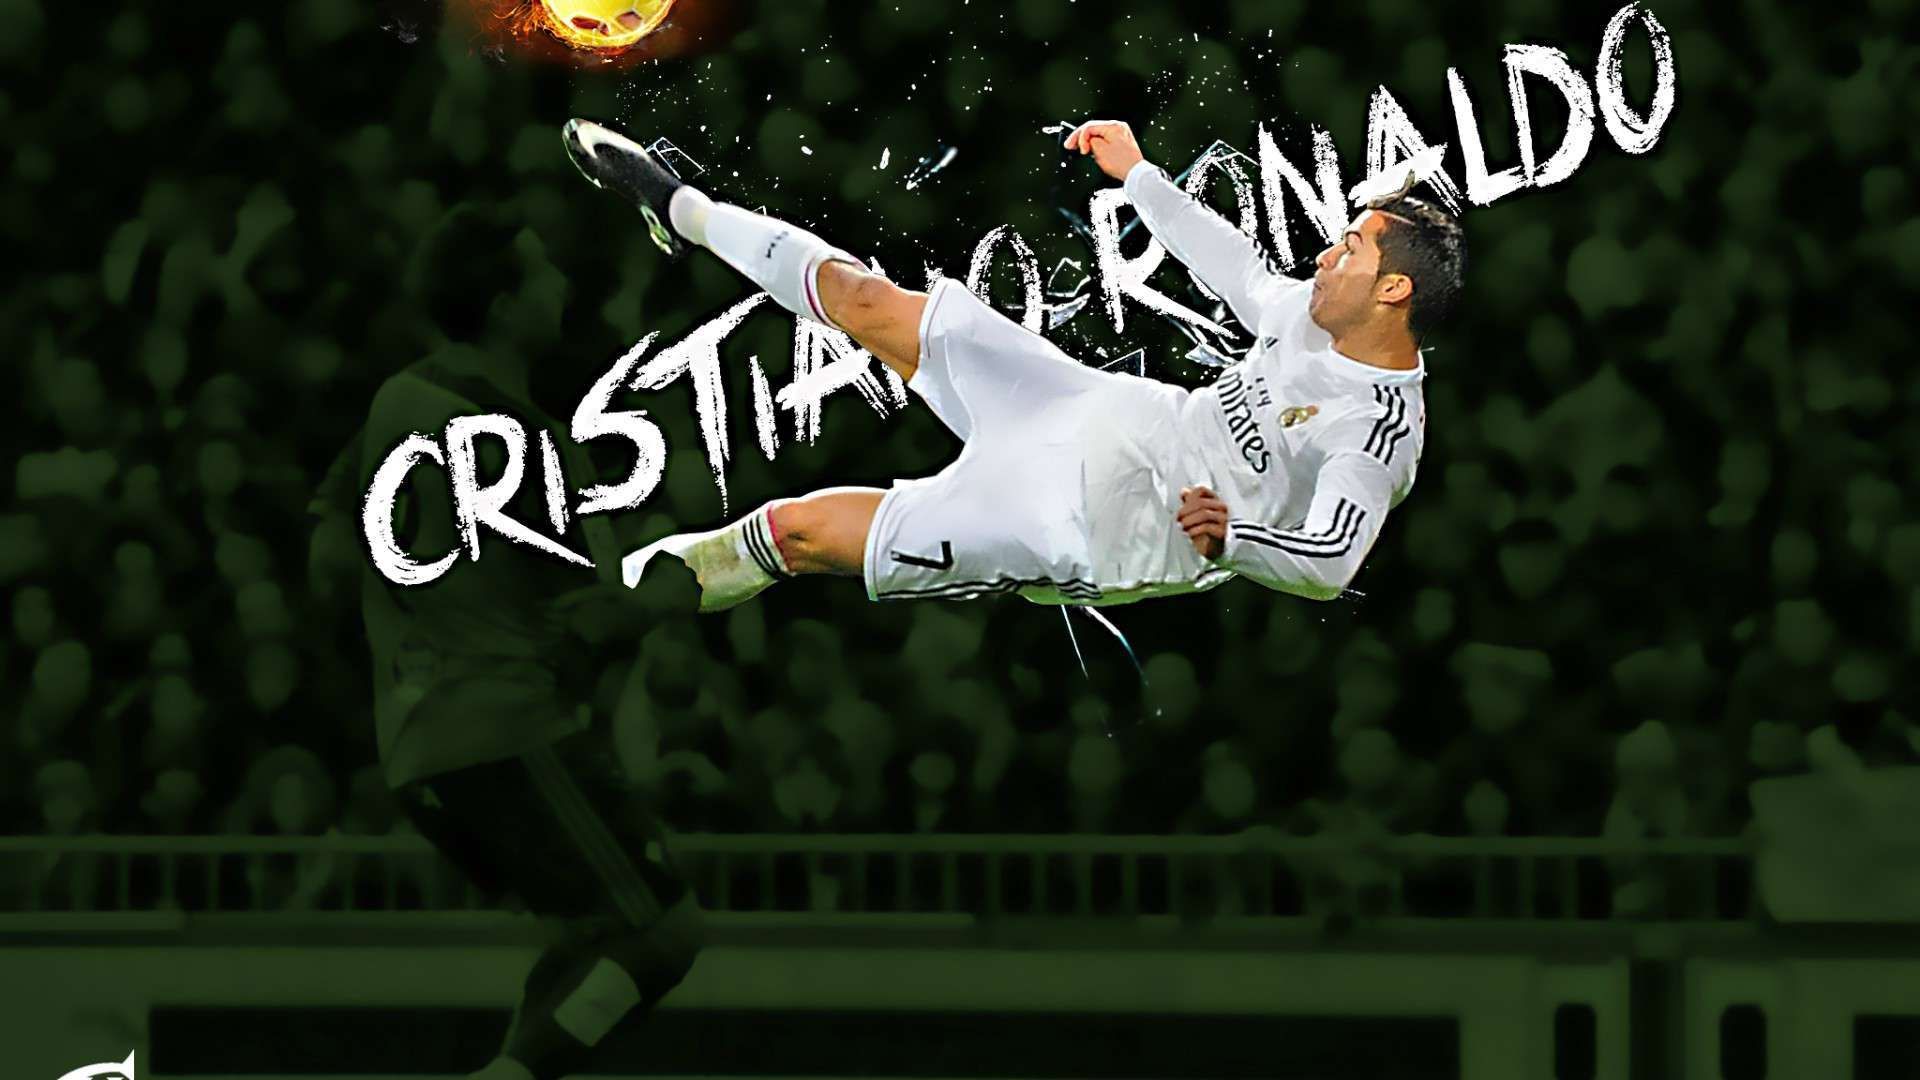 Cr7 Galaxy Wallpaper For Android Amazing Cristiano